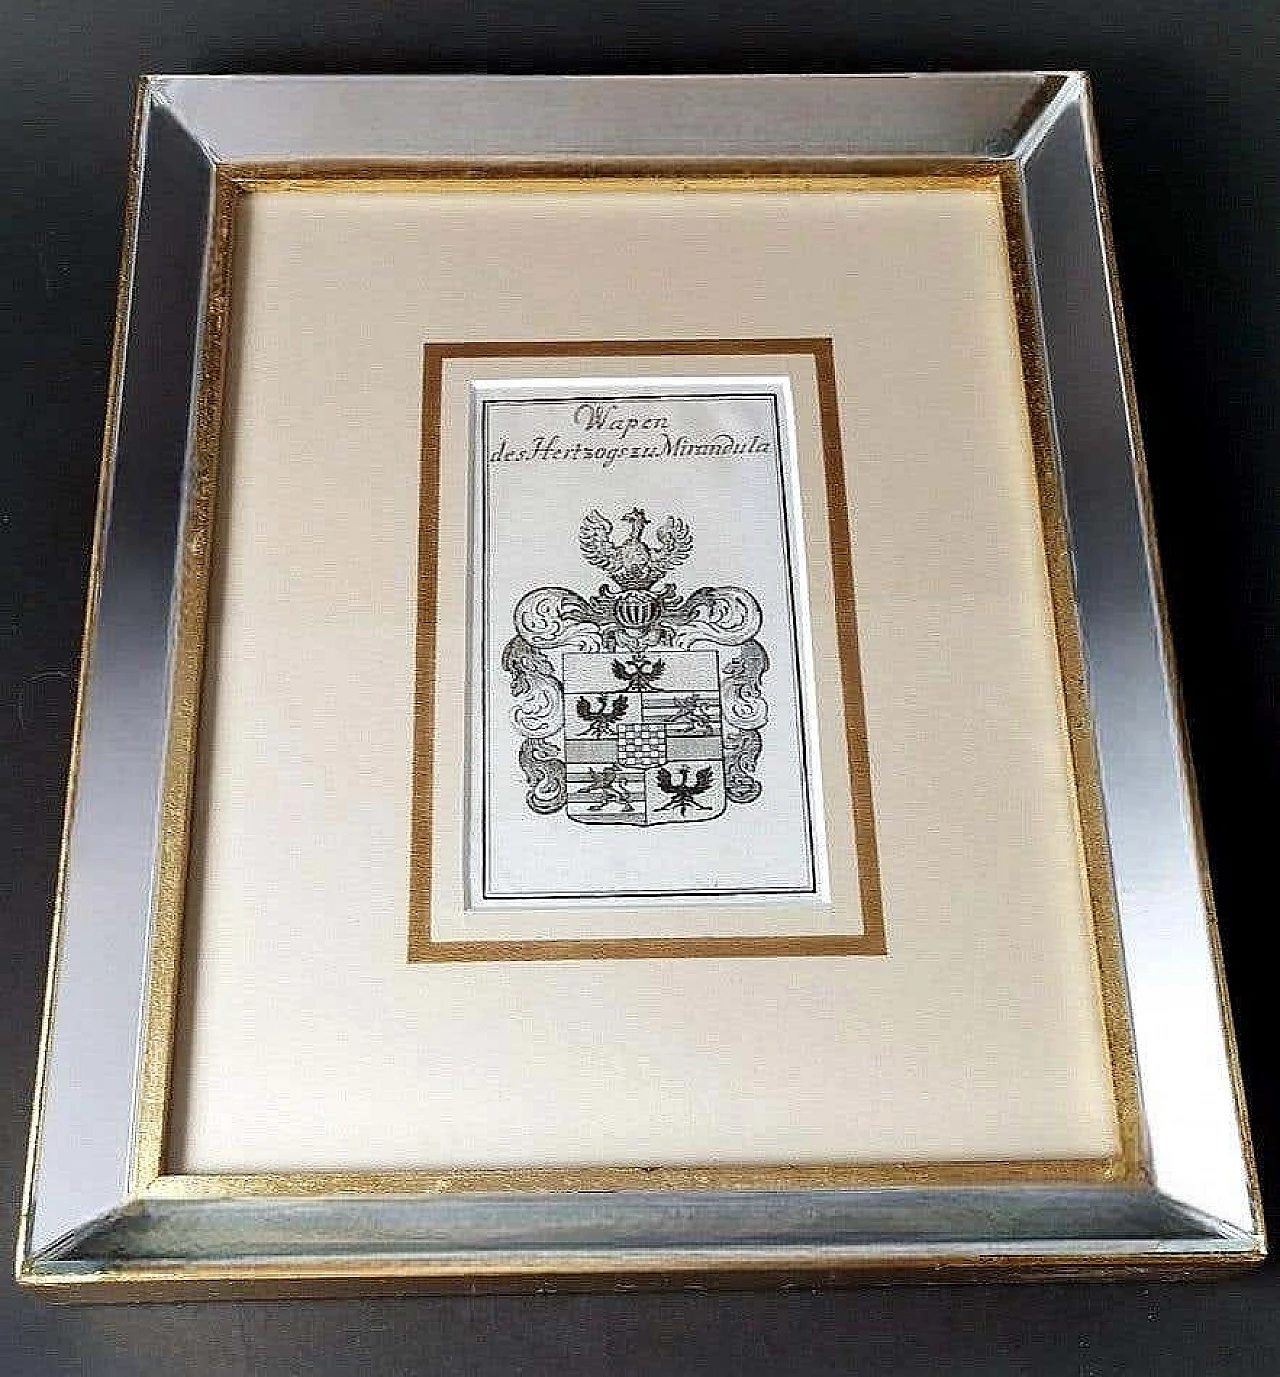 Engraved Dutch print depicting the coat of arms of the Dukes of Mirandola with mirrored frame, 17th century 2